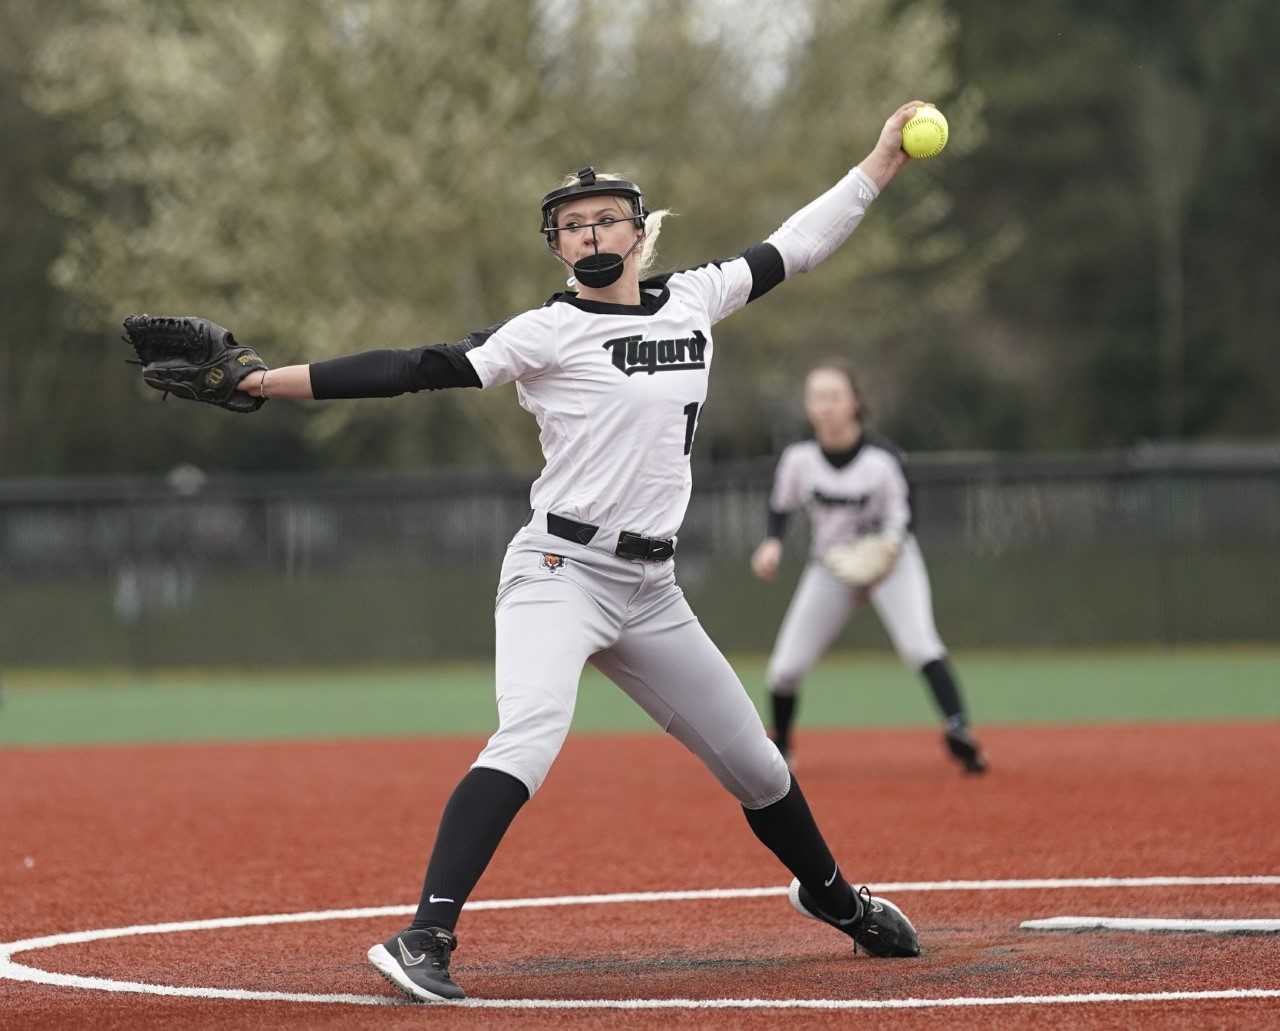 Tigard senior pitcher Makenna Reid has struck out 30 batters in her first two games this season. (Photo by Jon Olson)